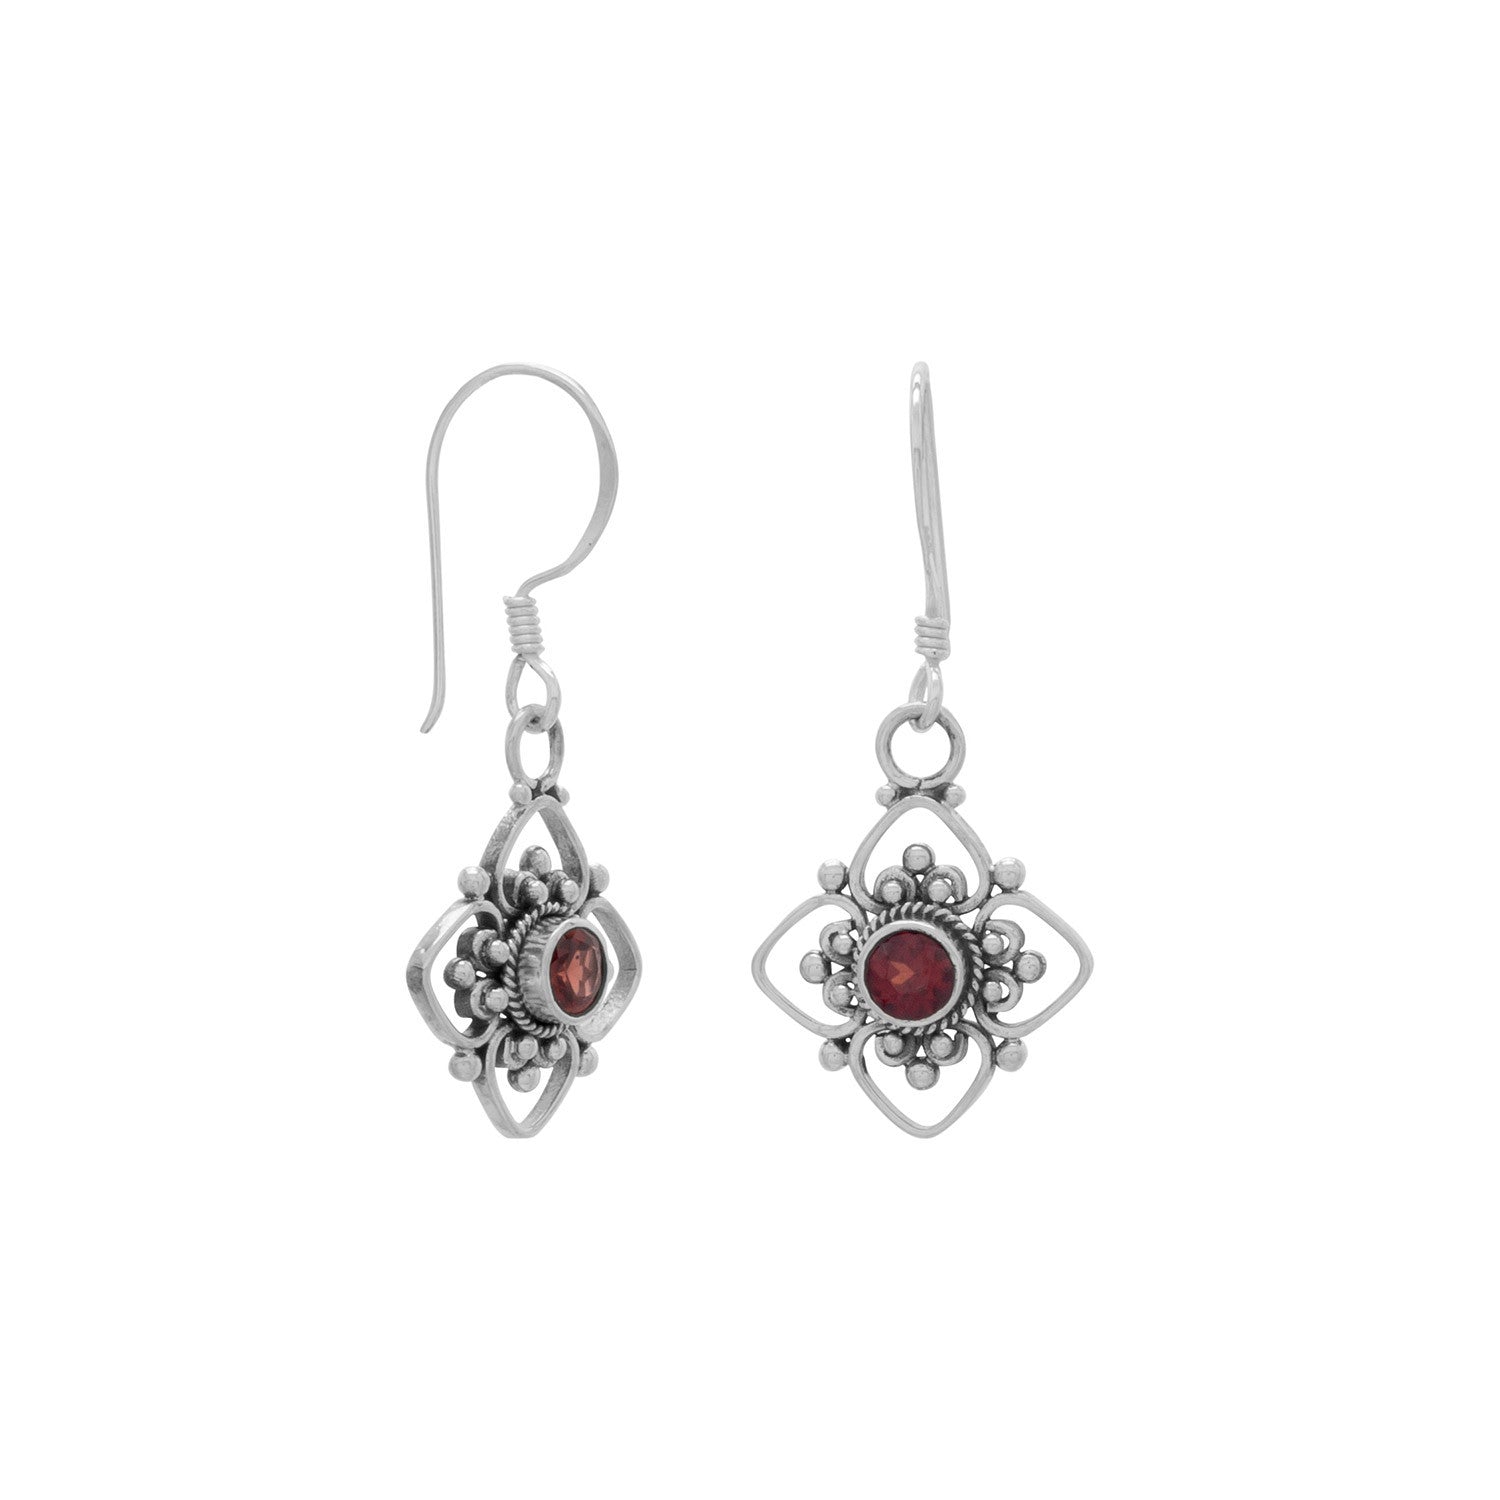 Faceted Garnet and Flower Design French Wire Earrings